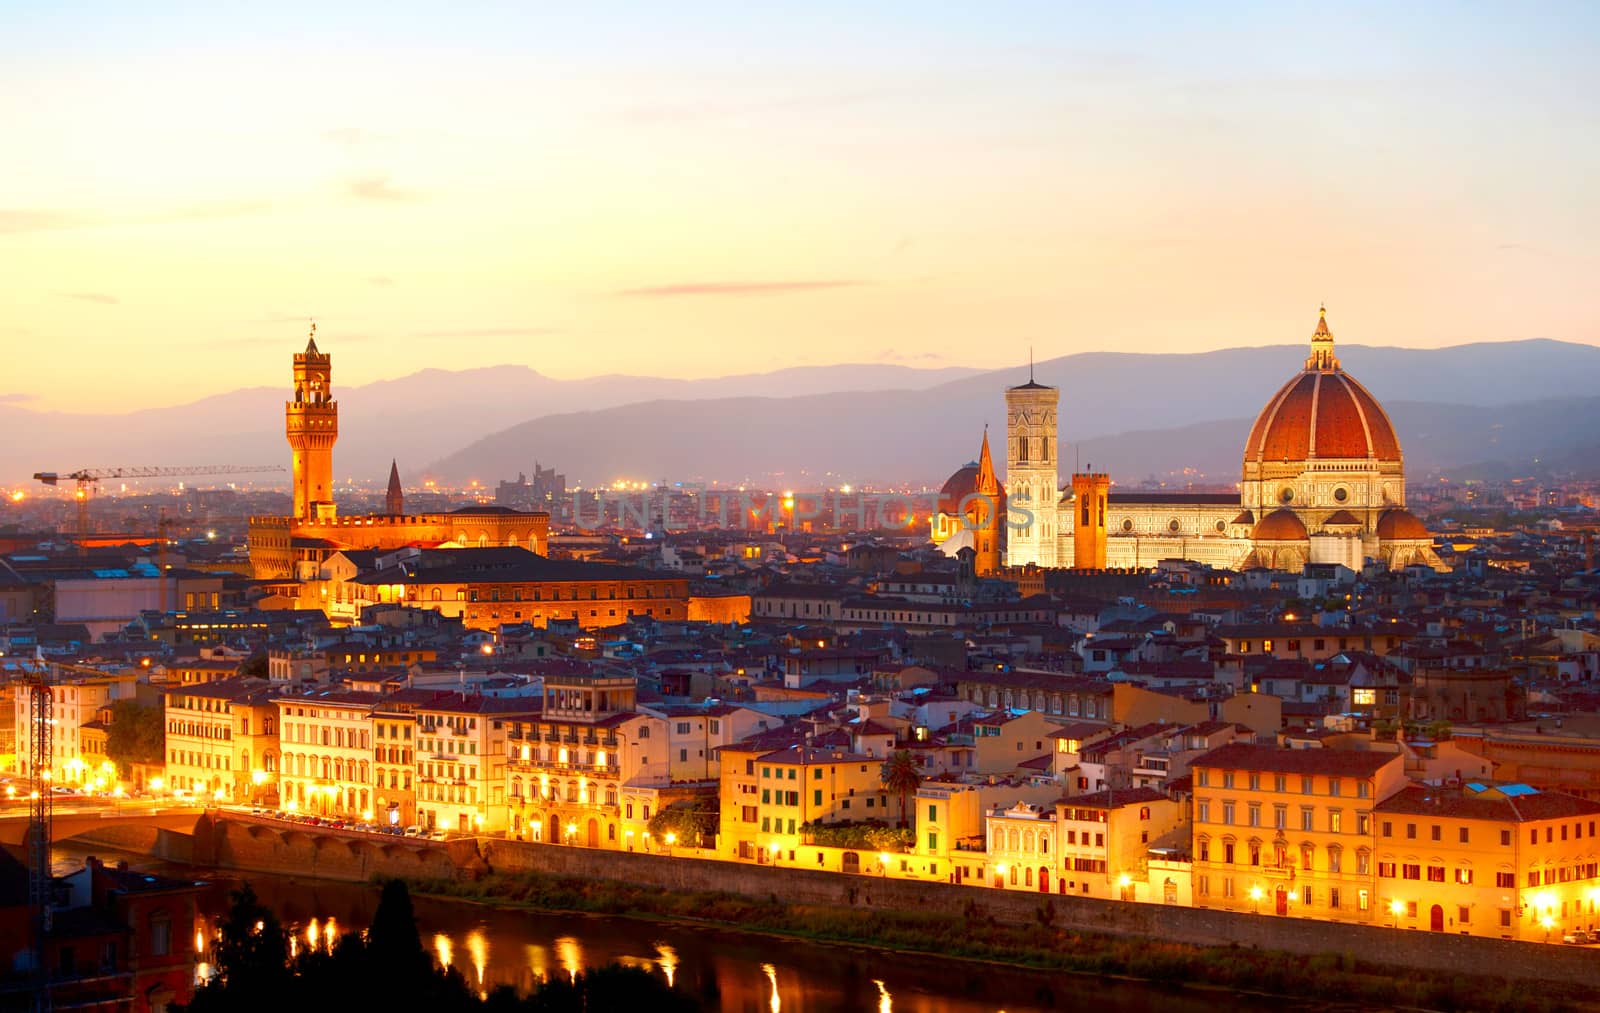 Skyline of Florence at colorful dusk, view from Piazzale Michelangelo